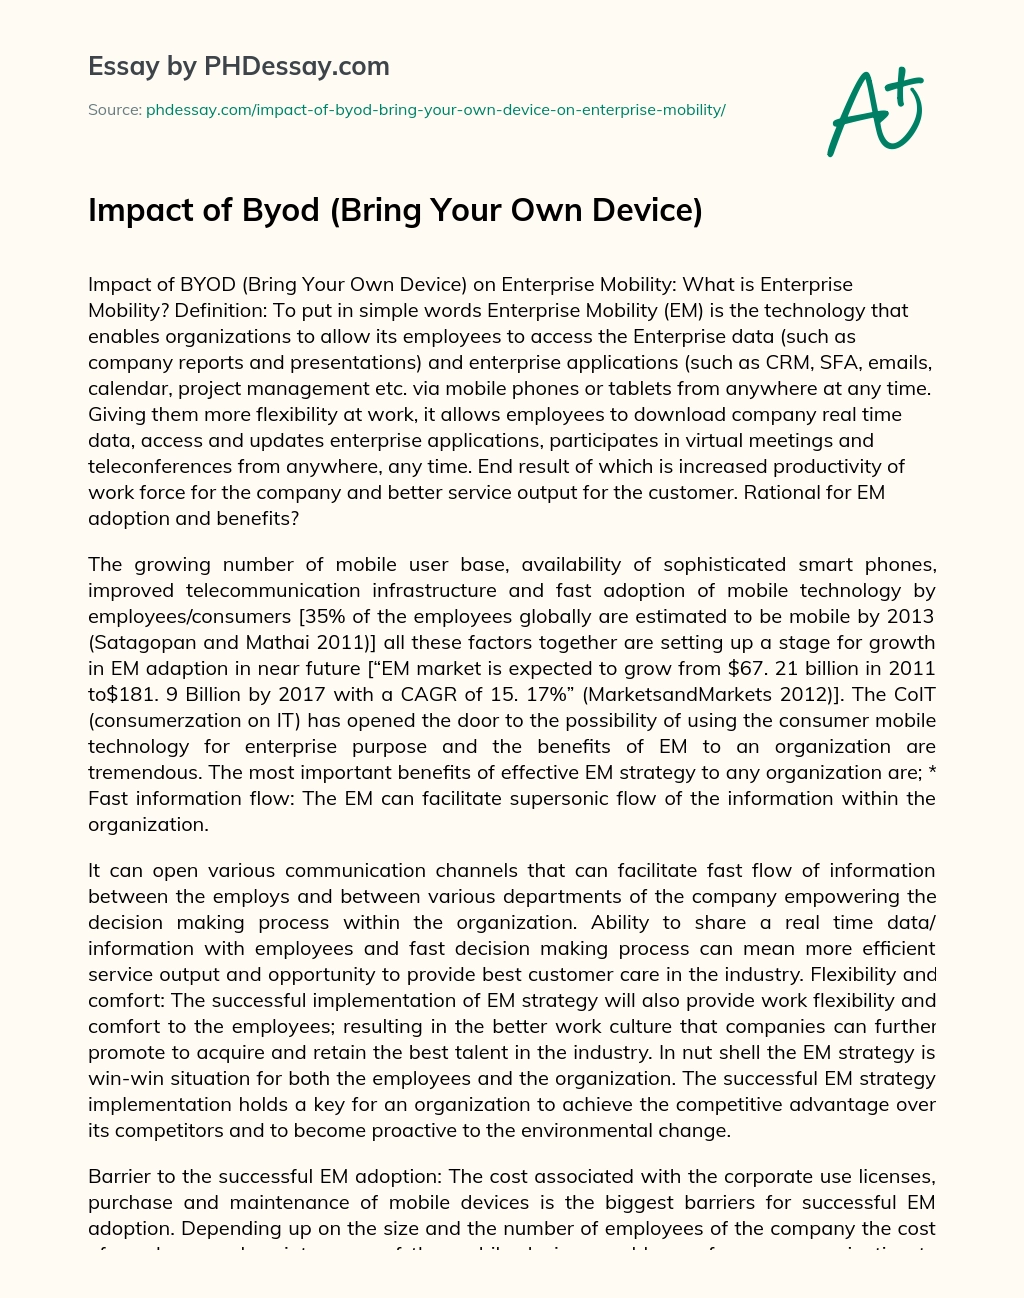 Impact of Byod (Bring Your Own Device) essay